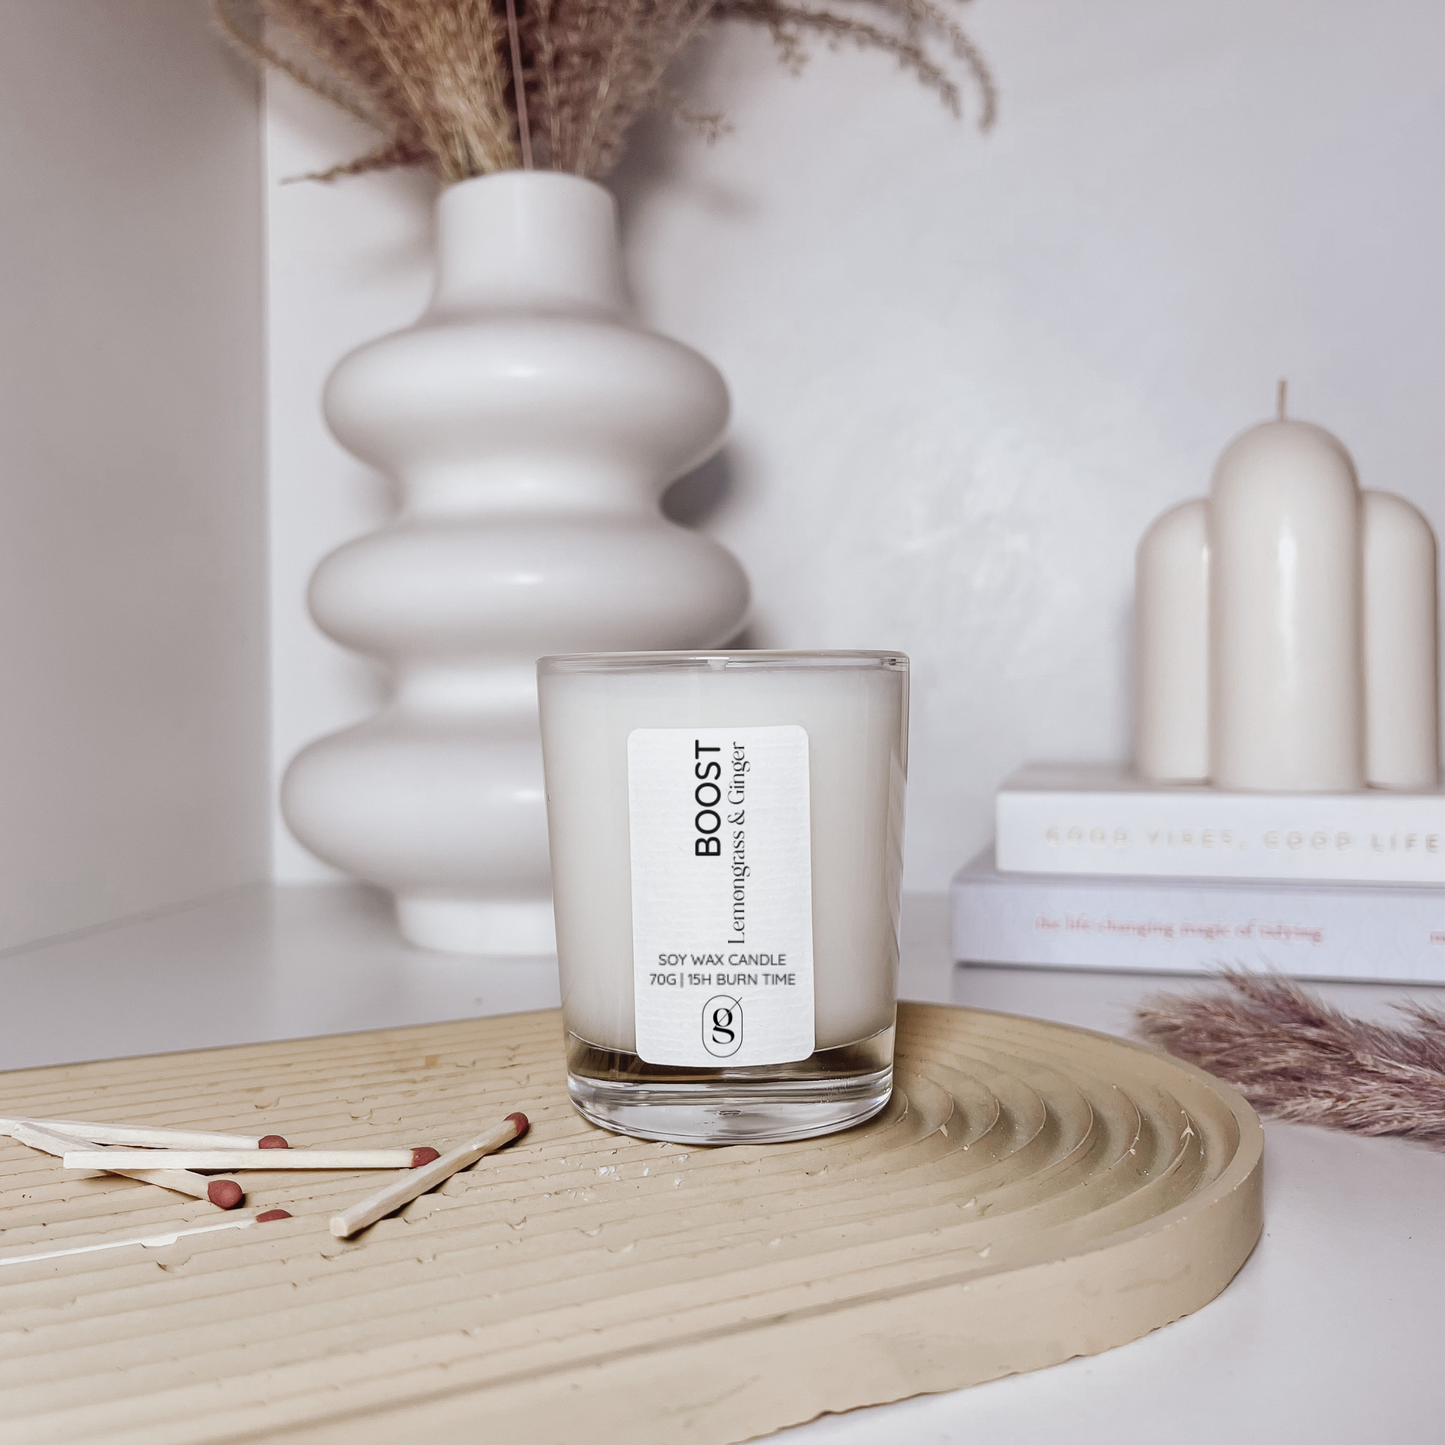 Boost | Lemongrass & Ginger soy wax candle